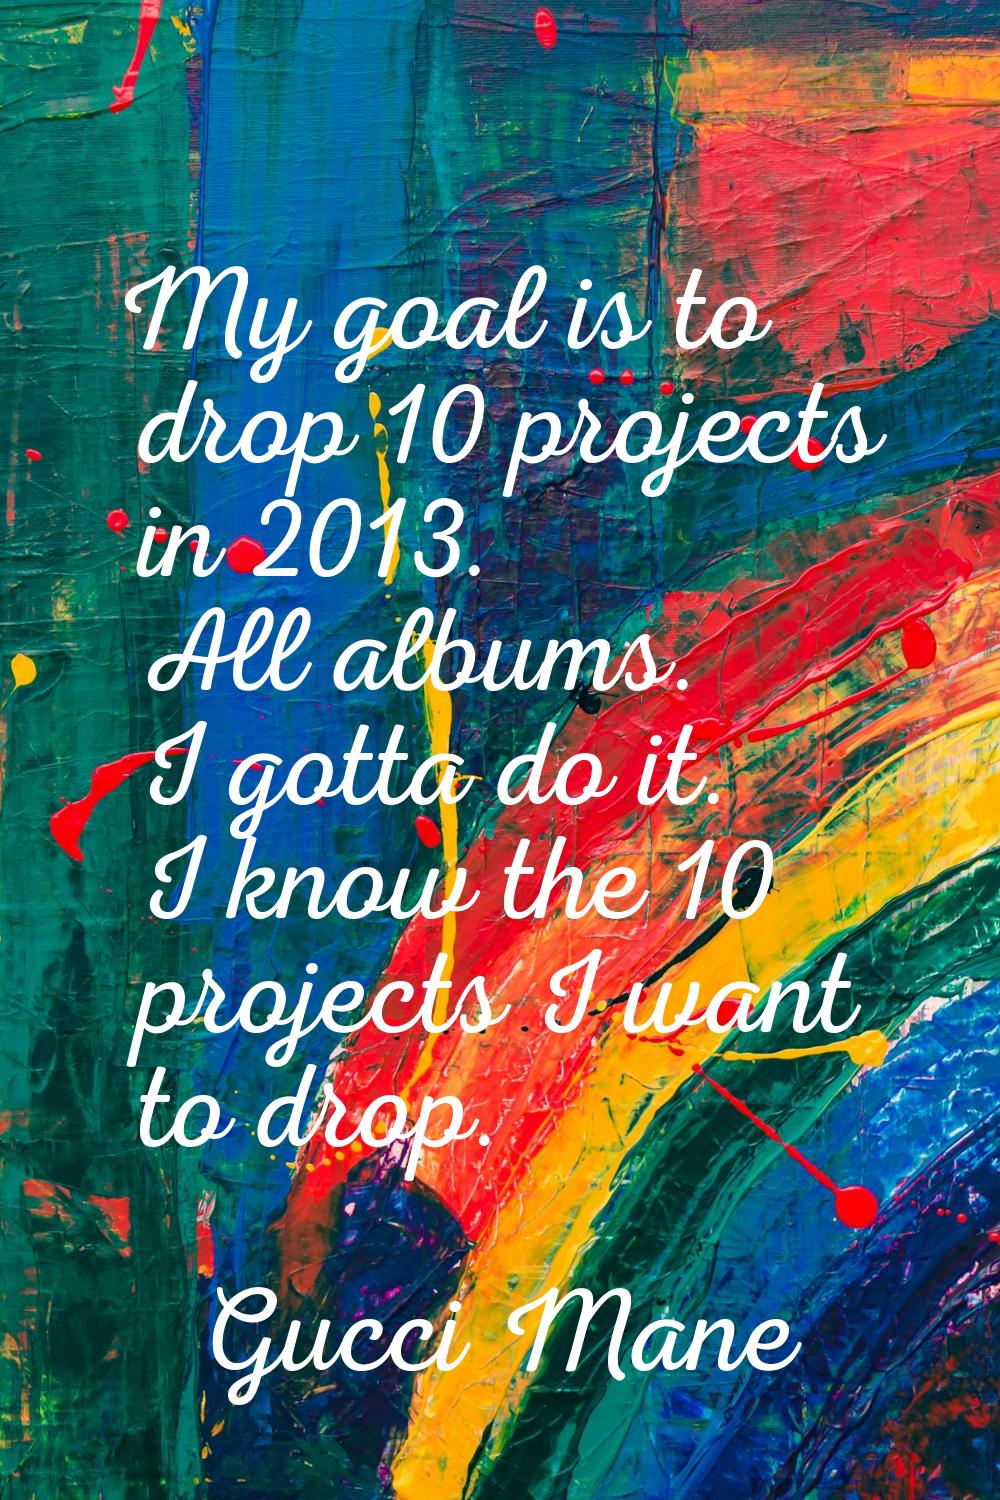 My goal is to drop 10 projects in 2013. All albums. I gotta do it. I know the 10 projects I want to